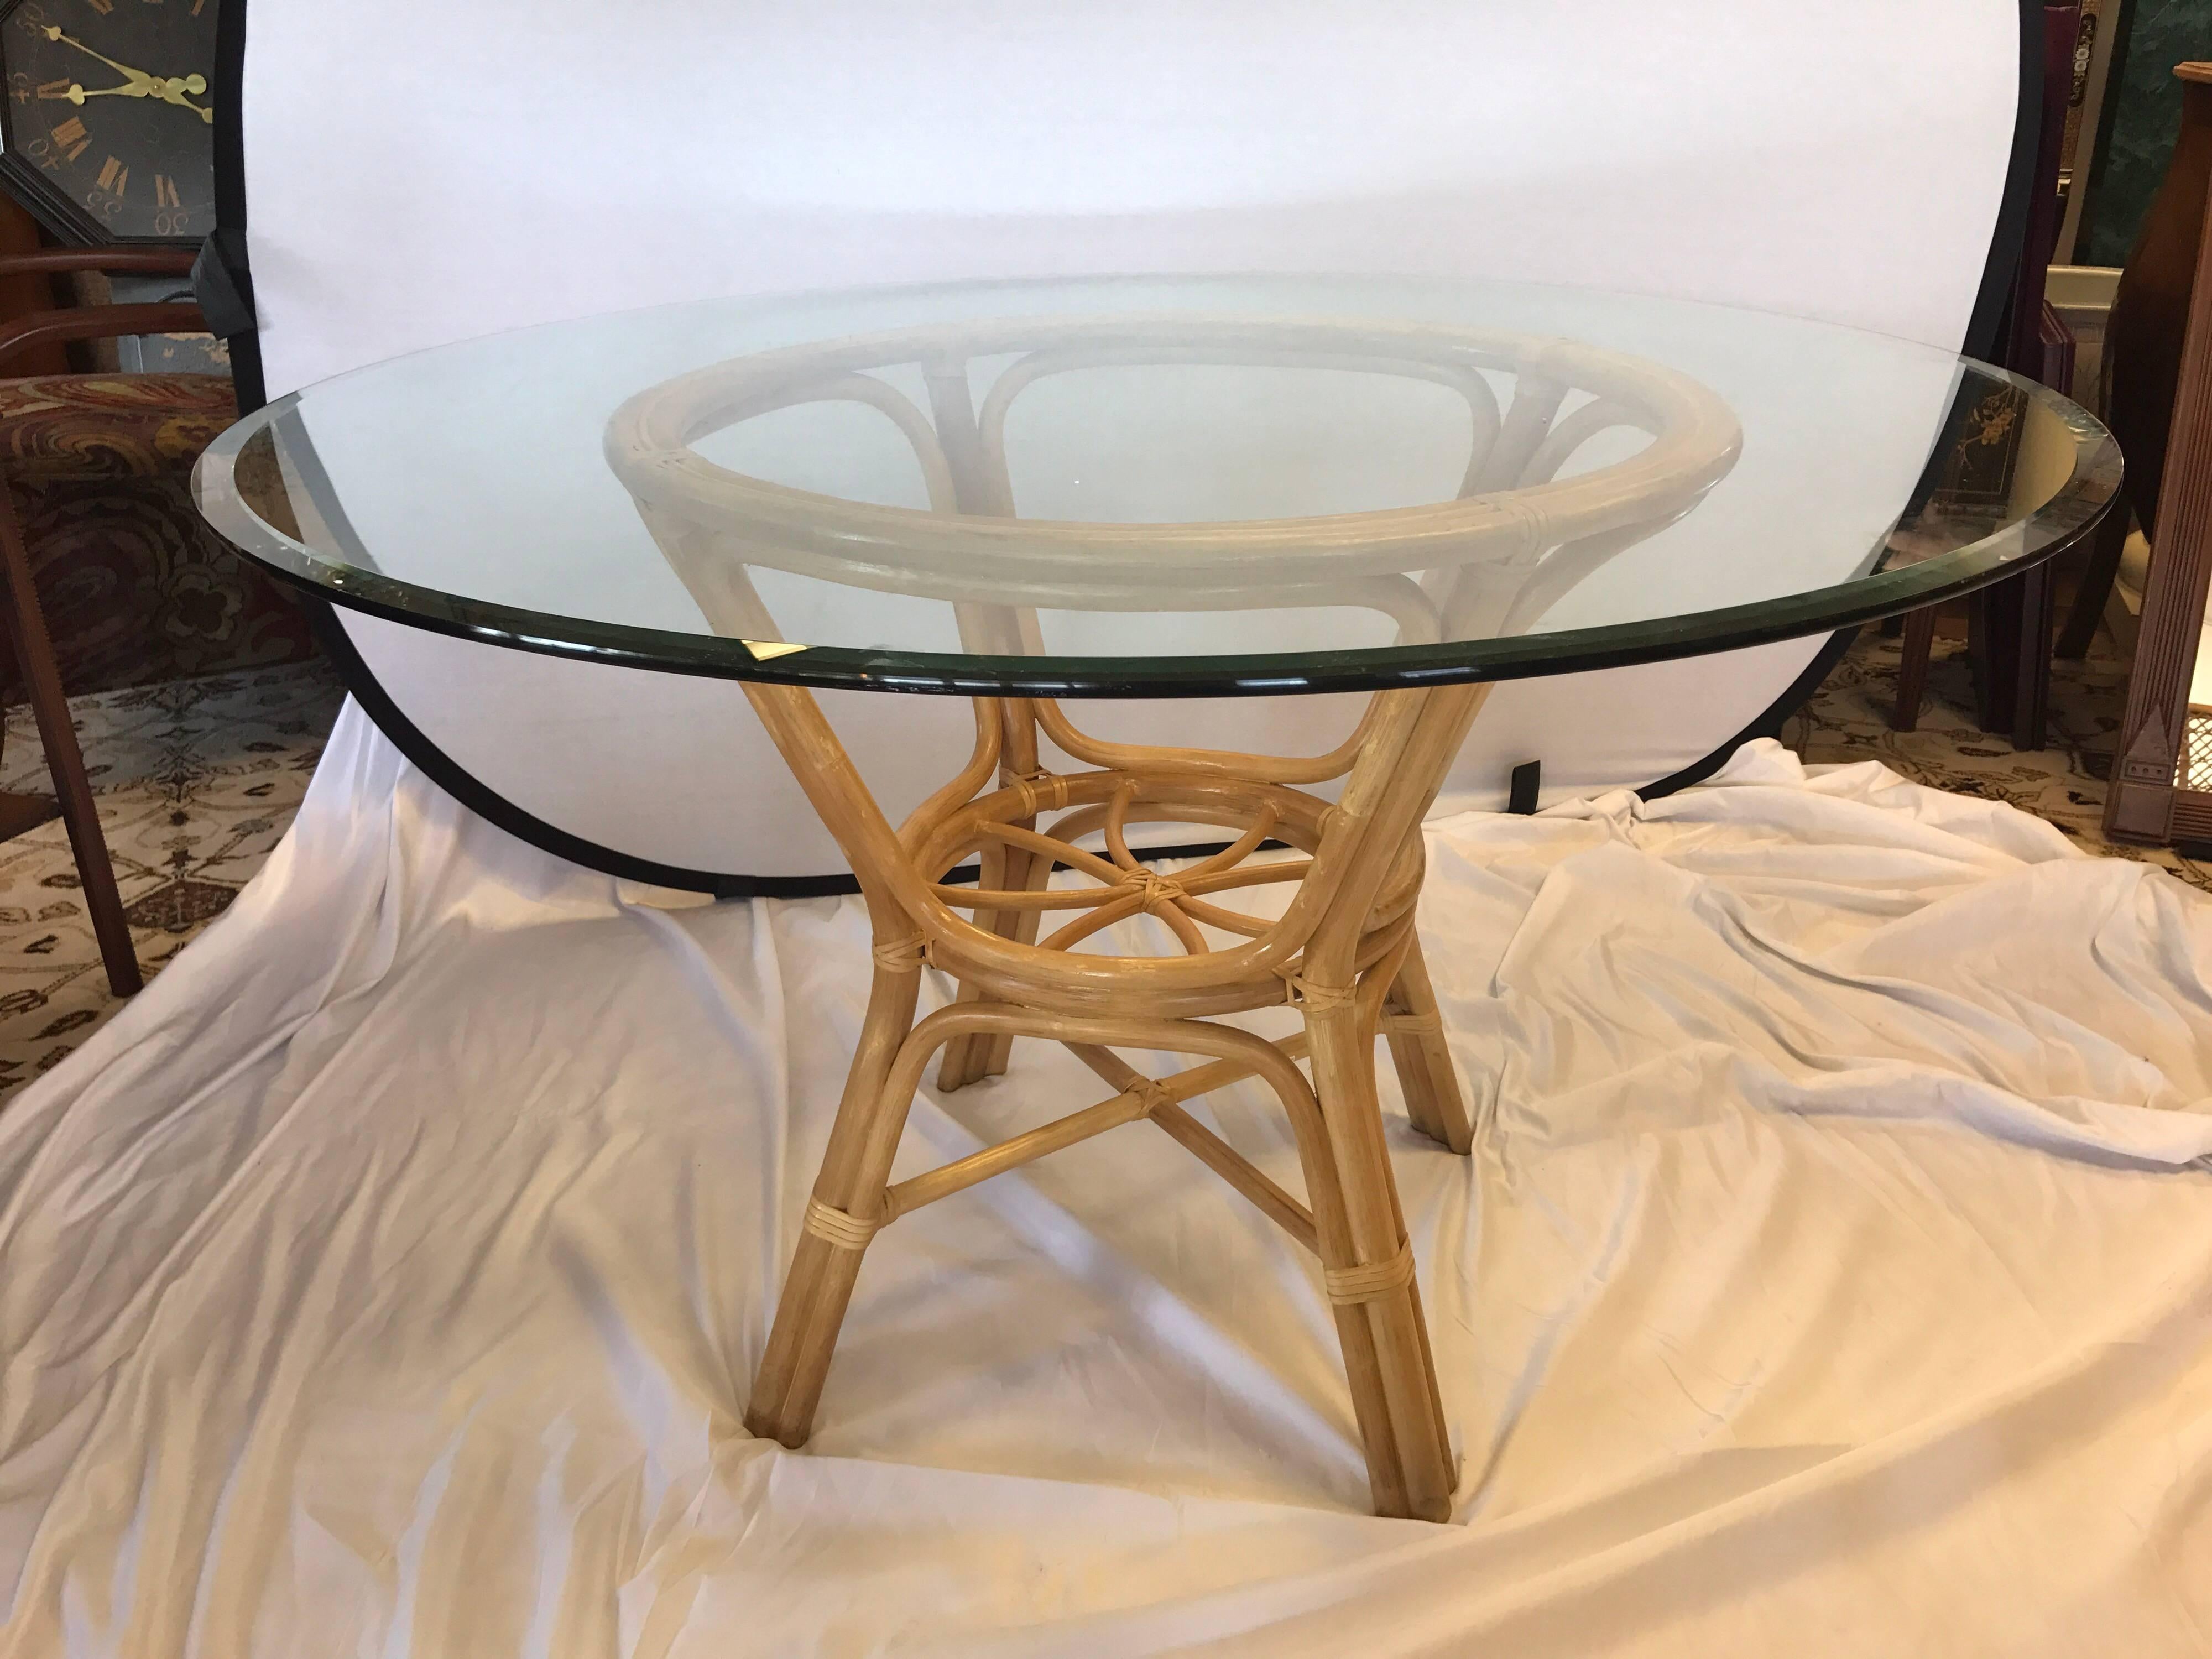 Elegant Mid-Century Modern rattan bamboo set in mint condition. Features glass top table and four large dining chairs. Perfect for kitchen, dining room our three season porch!